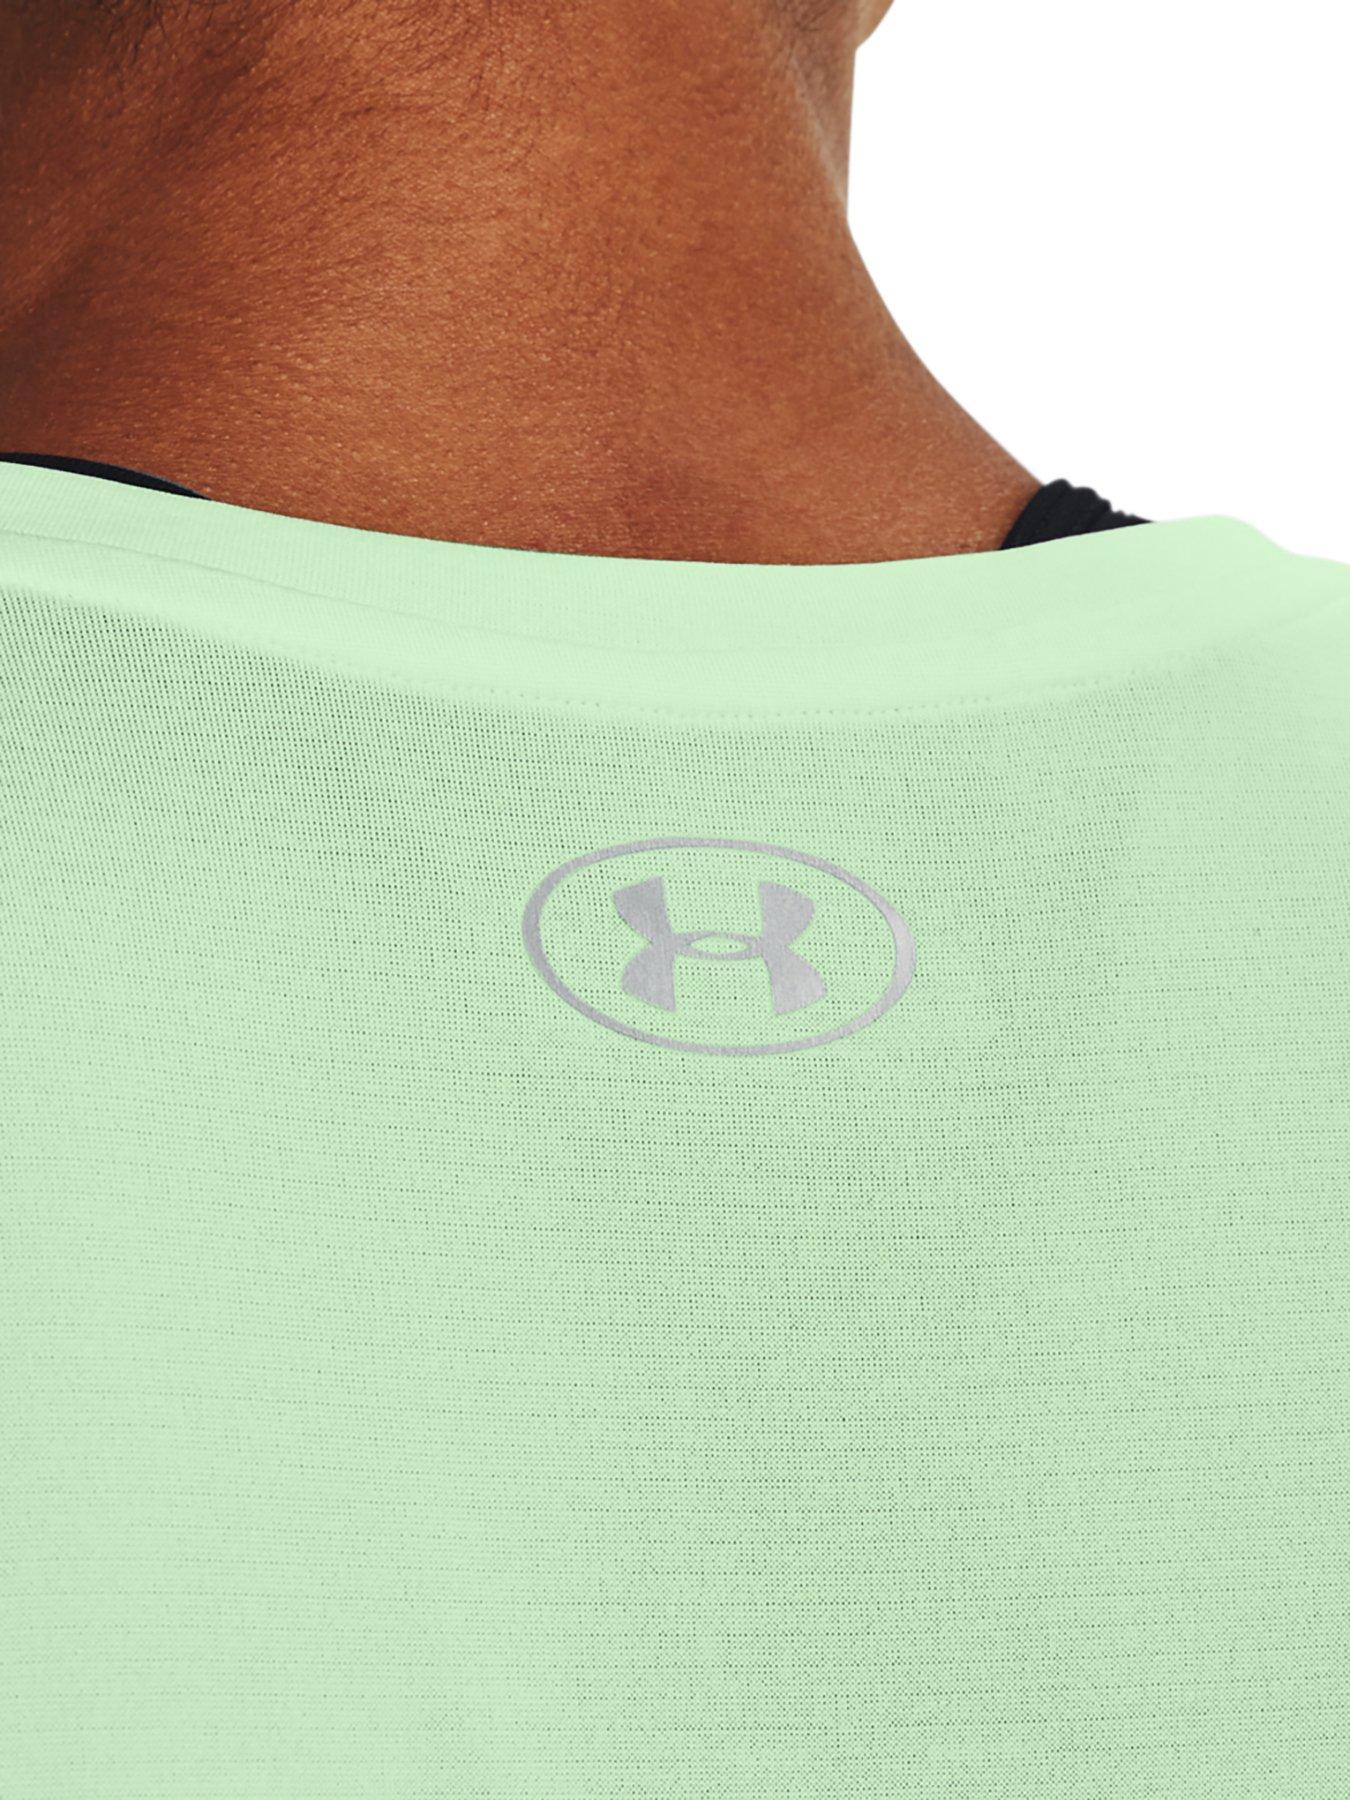 Tops & T-shirts Under Armour Training Twist Tech Top - Blue/Silver